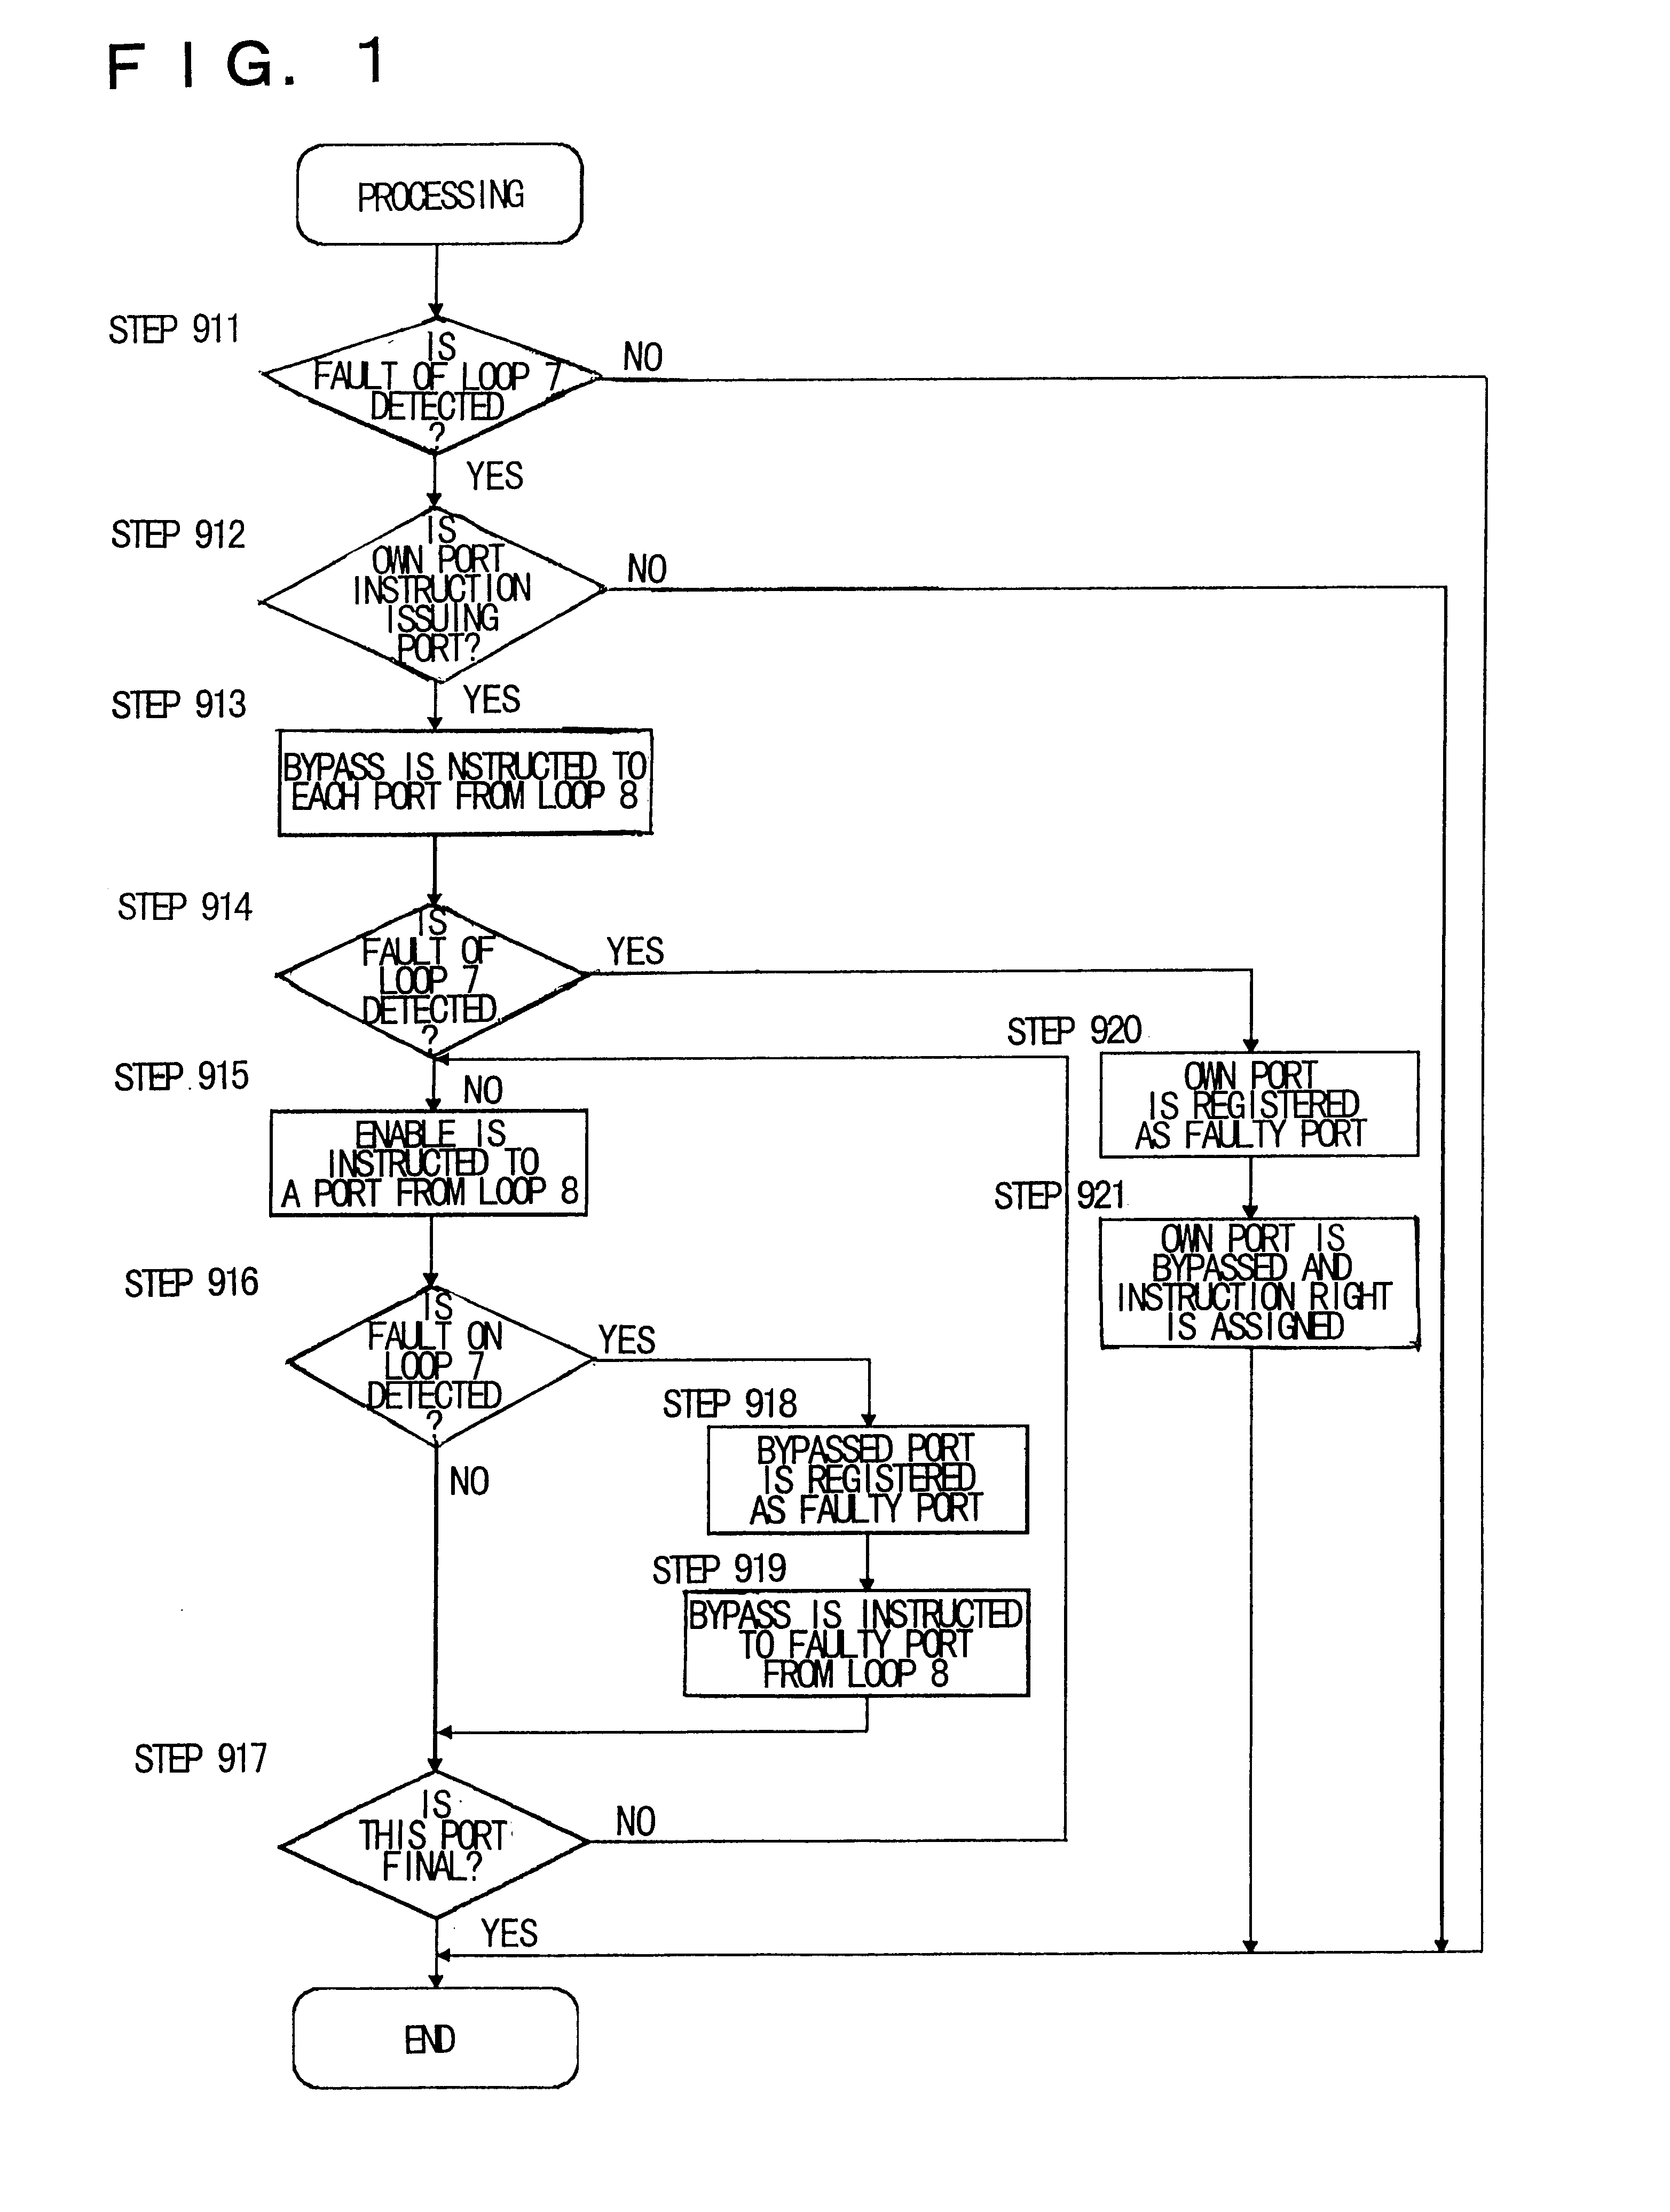 System and process for detecting/eliminating faulty port in fiber channel-arbitrated loop